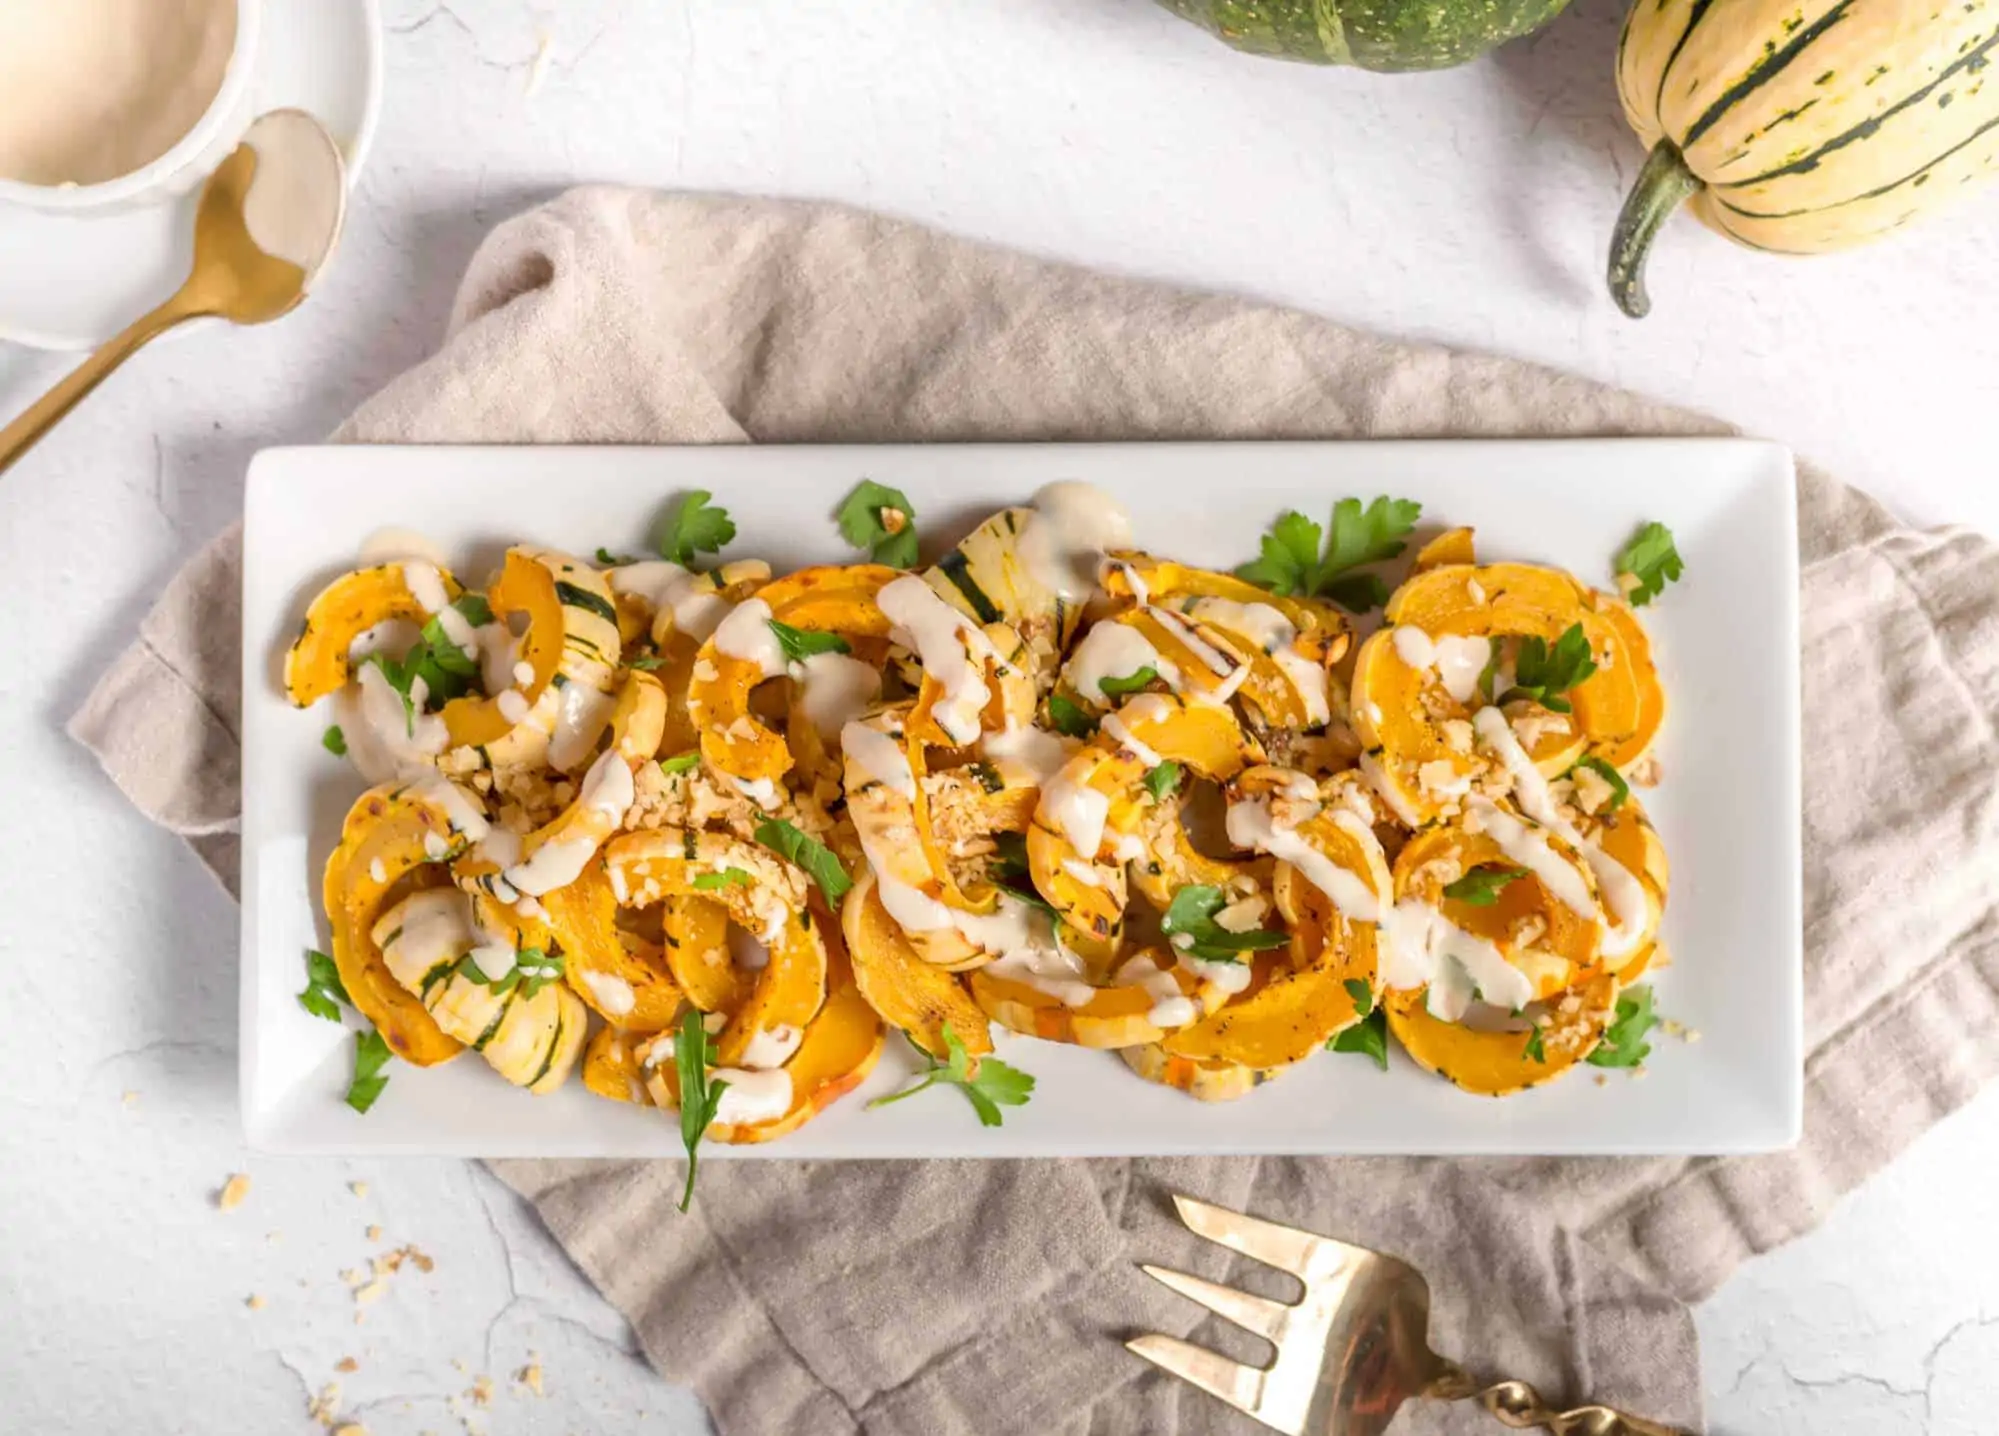 A plate of roasted delicata squash drizzled with dressing and garnished with parsley.